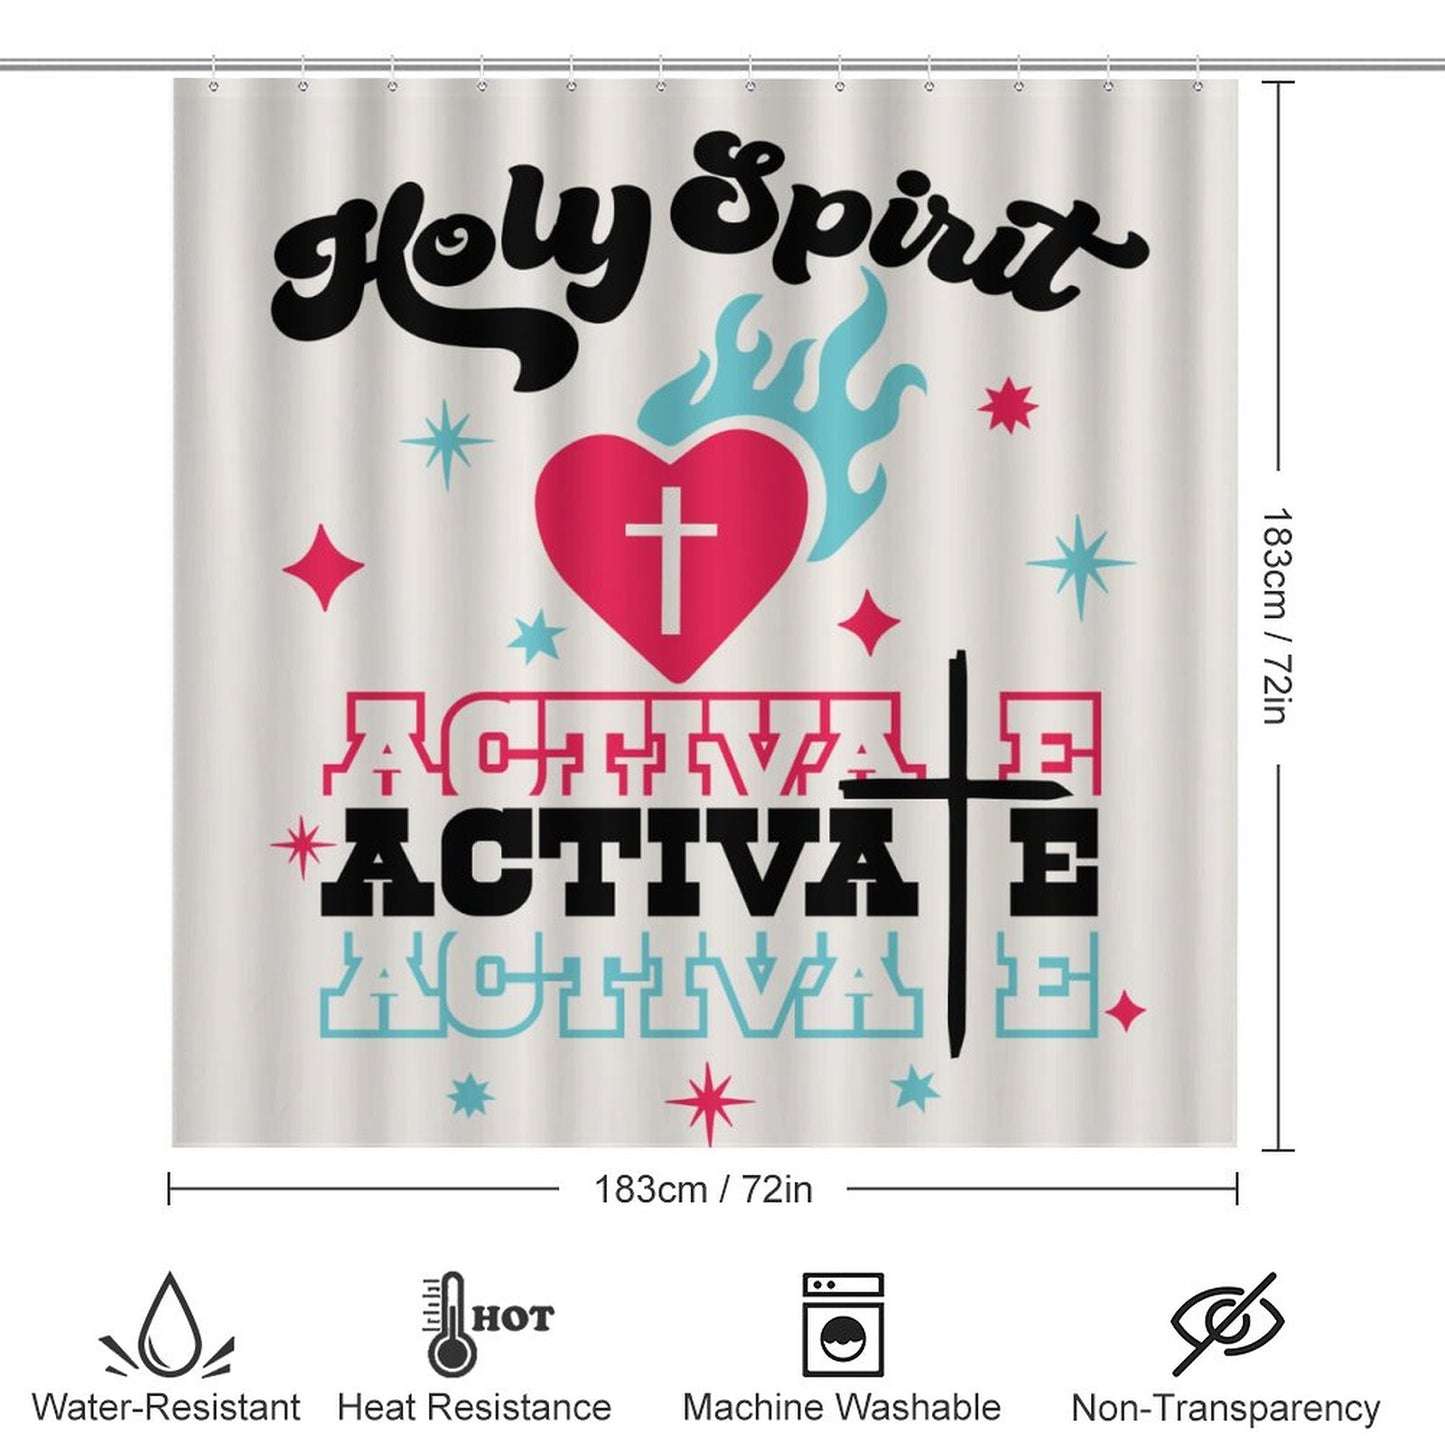 Holy Spirit Activate Shower Curtain Set with a bath rug, a contour rug and a toilet lid cover.